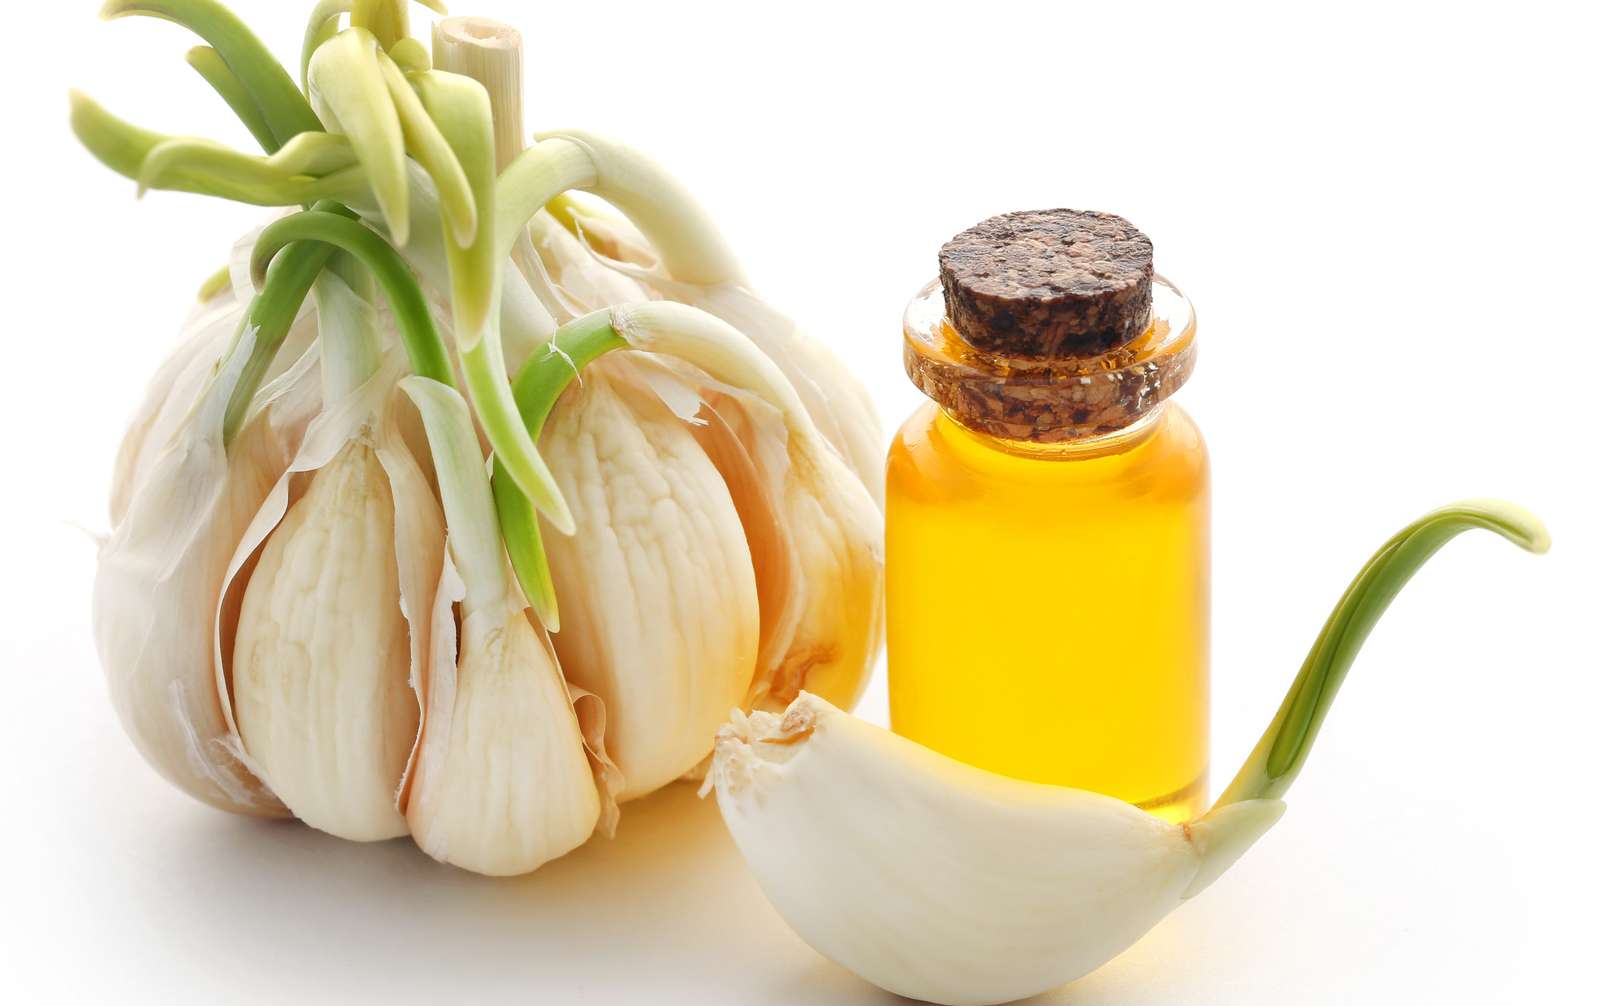 Garlic essential oil: what are its virtues?